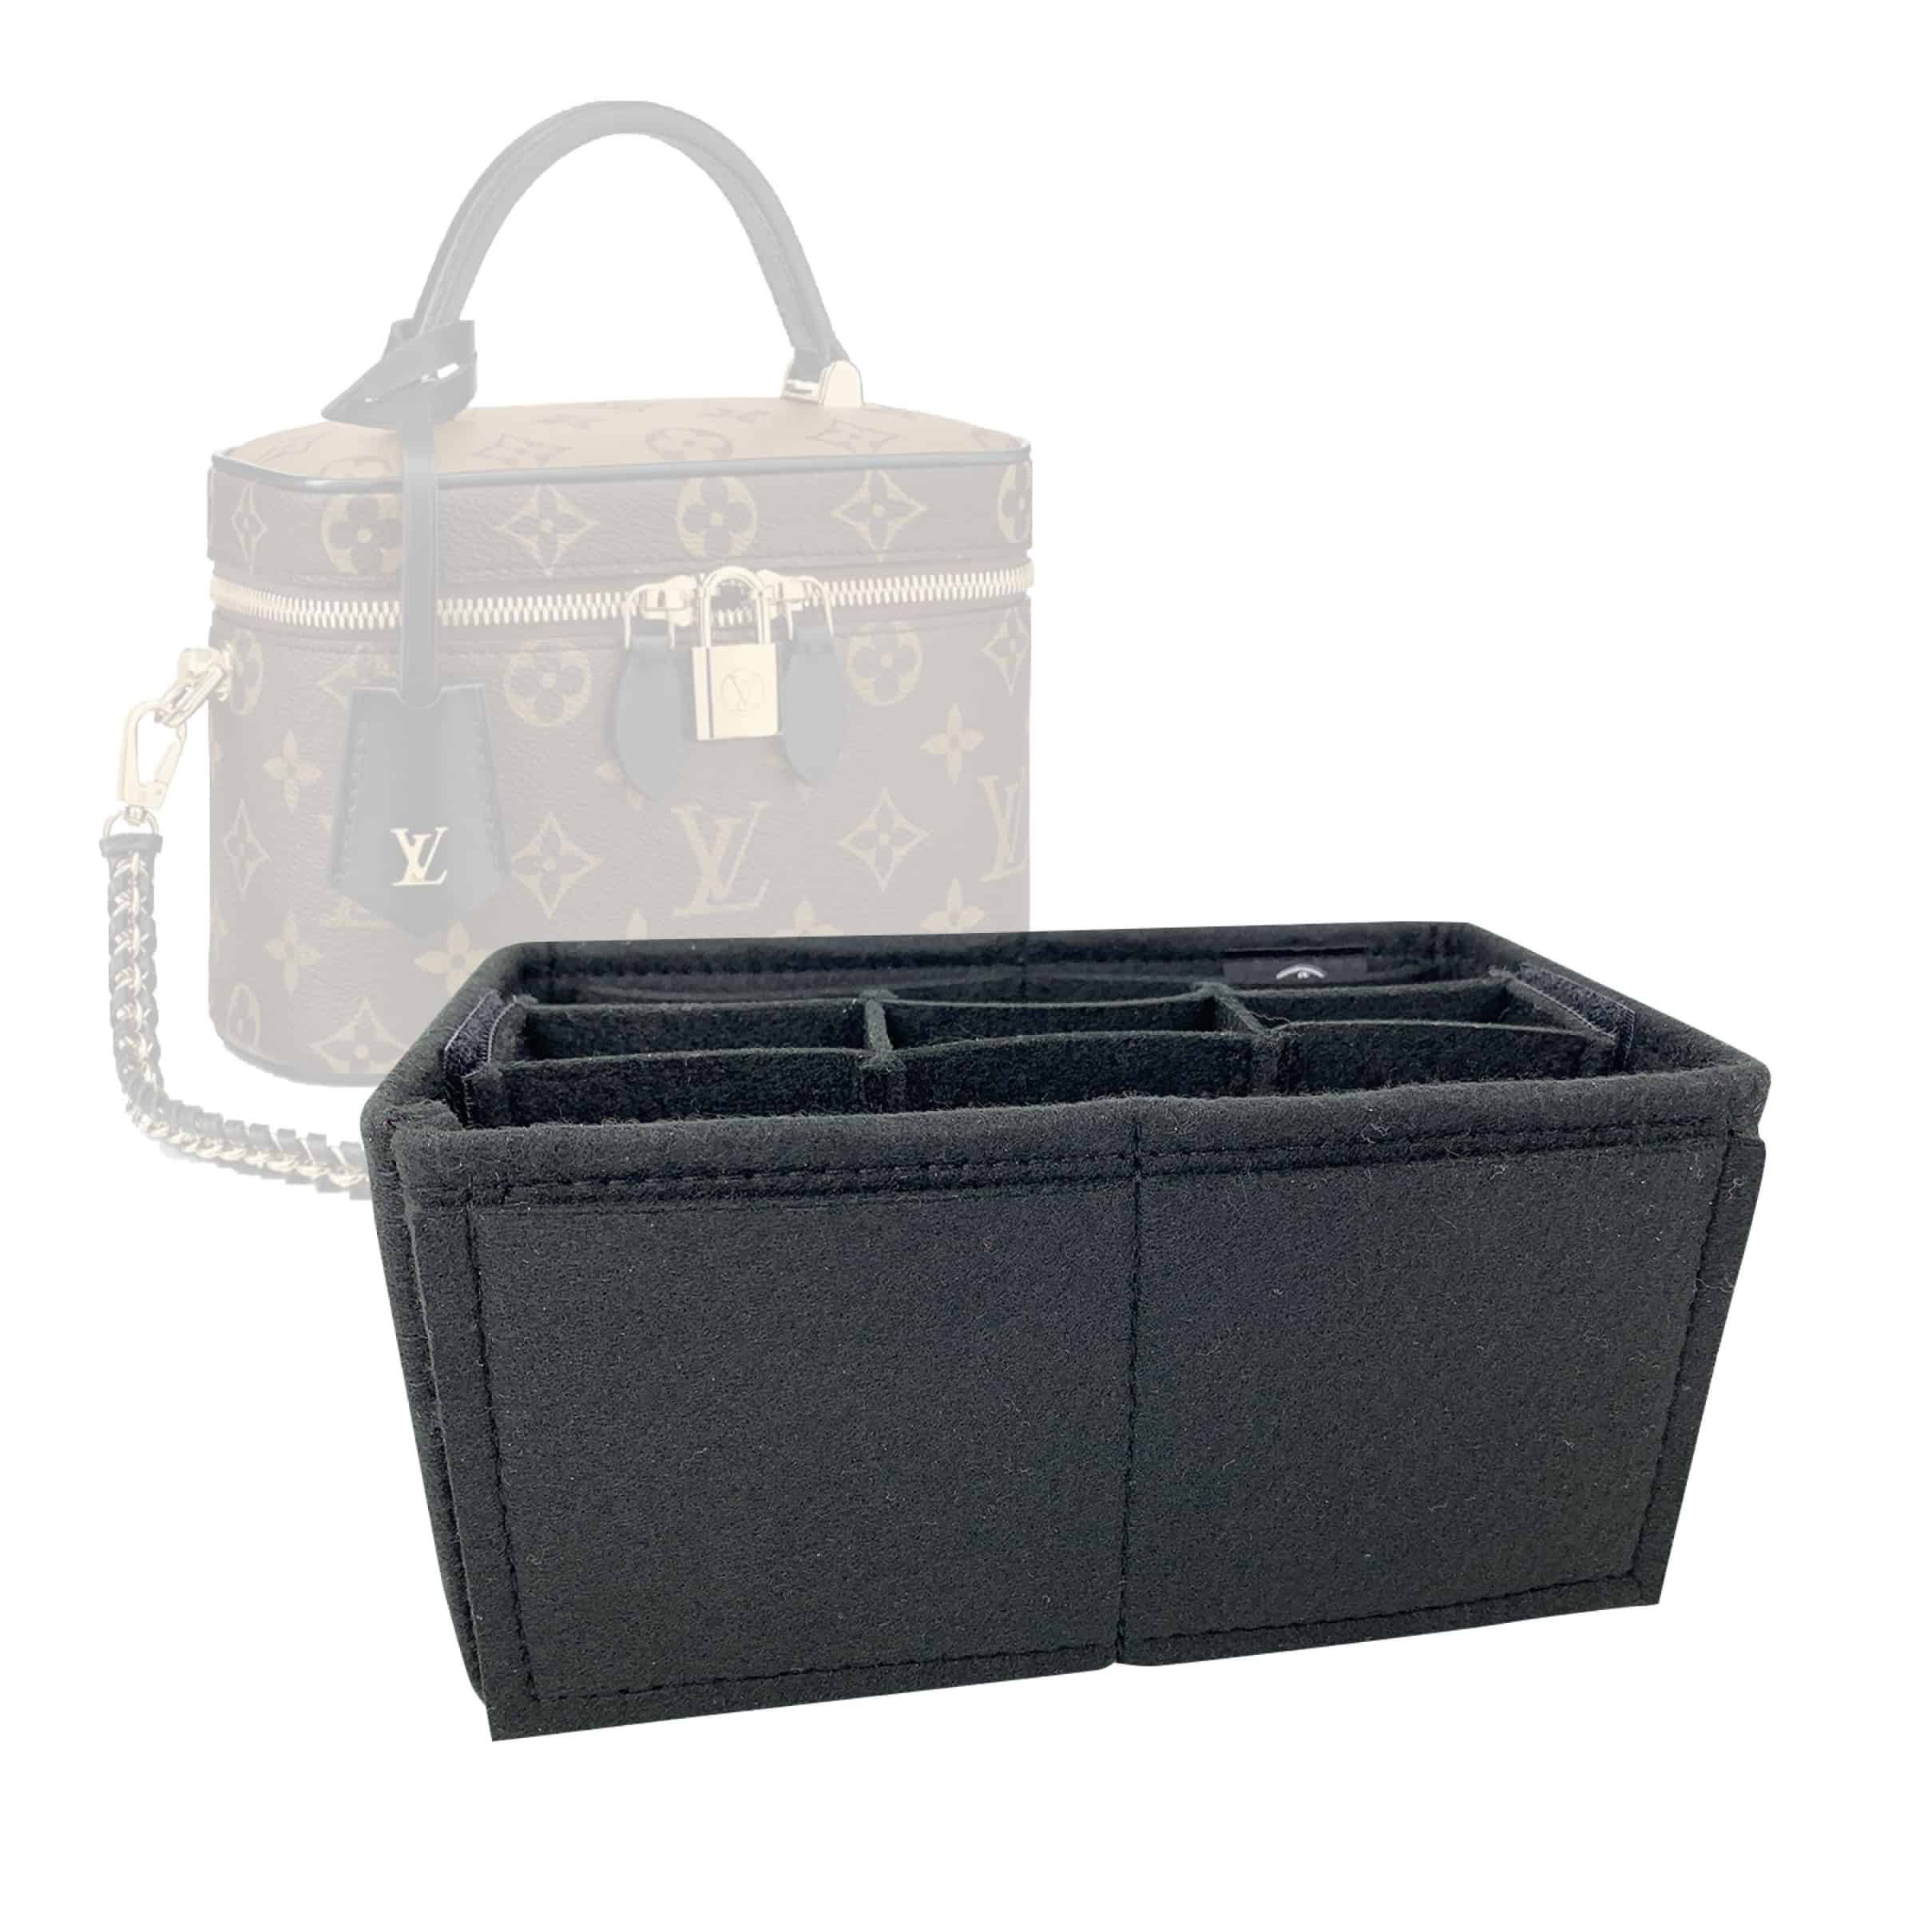 Louis Vuitton Artsy Organizer Insert, Bag Organizer with Middle Compartment